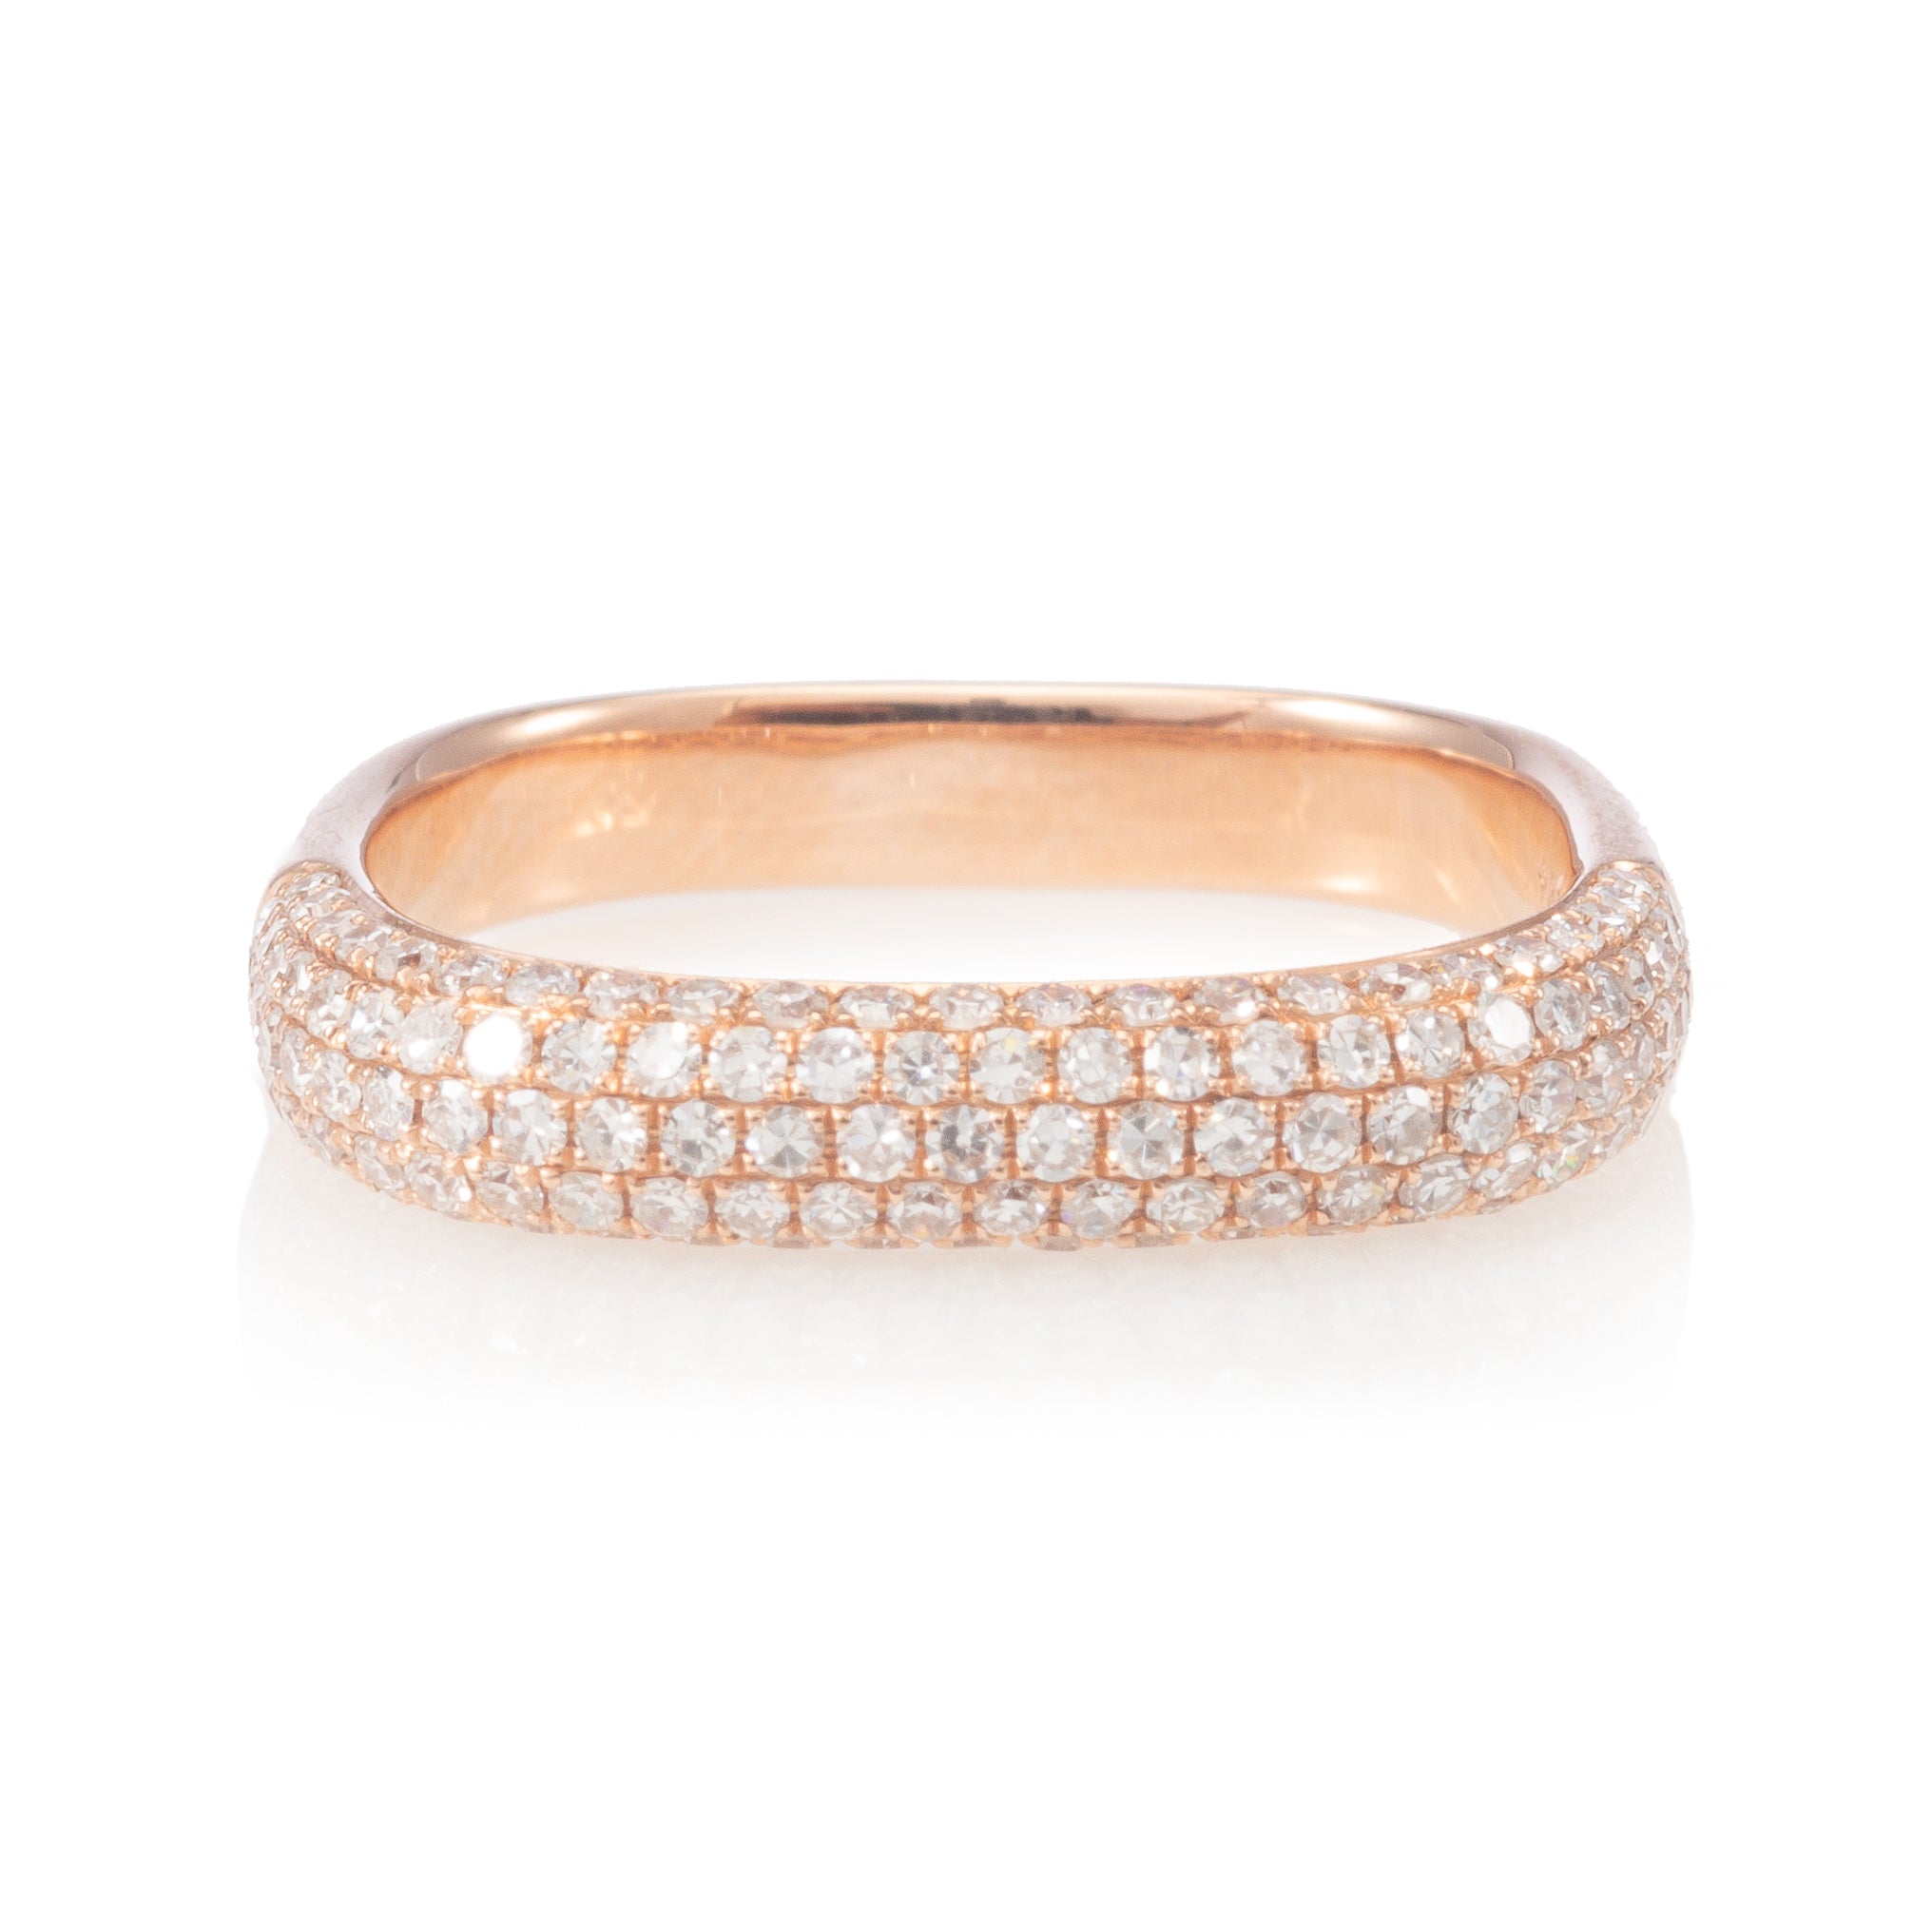 Wide Pave Set Diamond Ring | Lanes Jewellery & Prestige Watches In Holt,  Norfolk